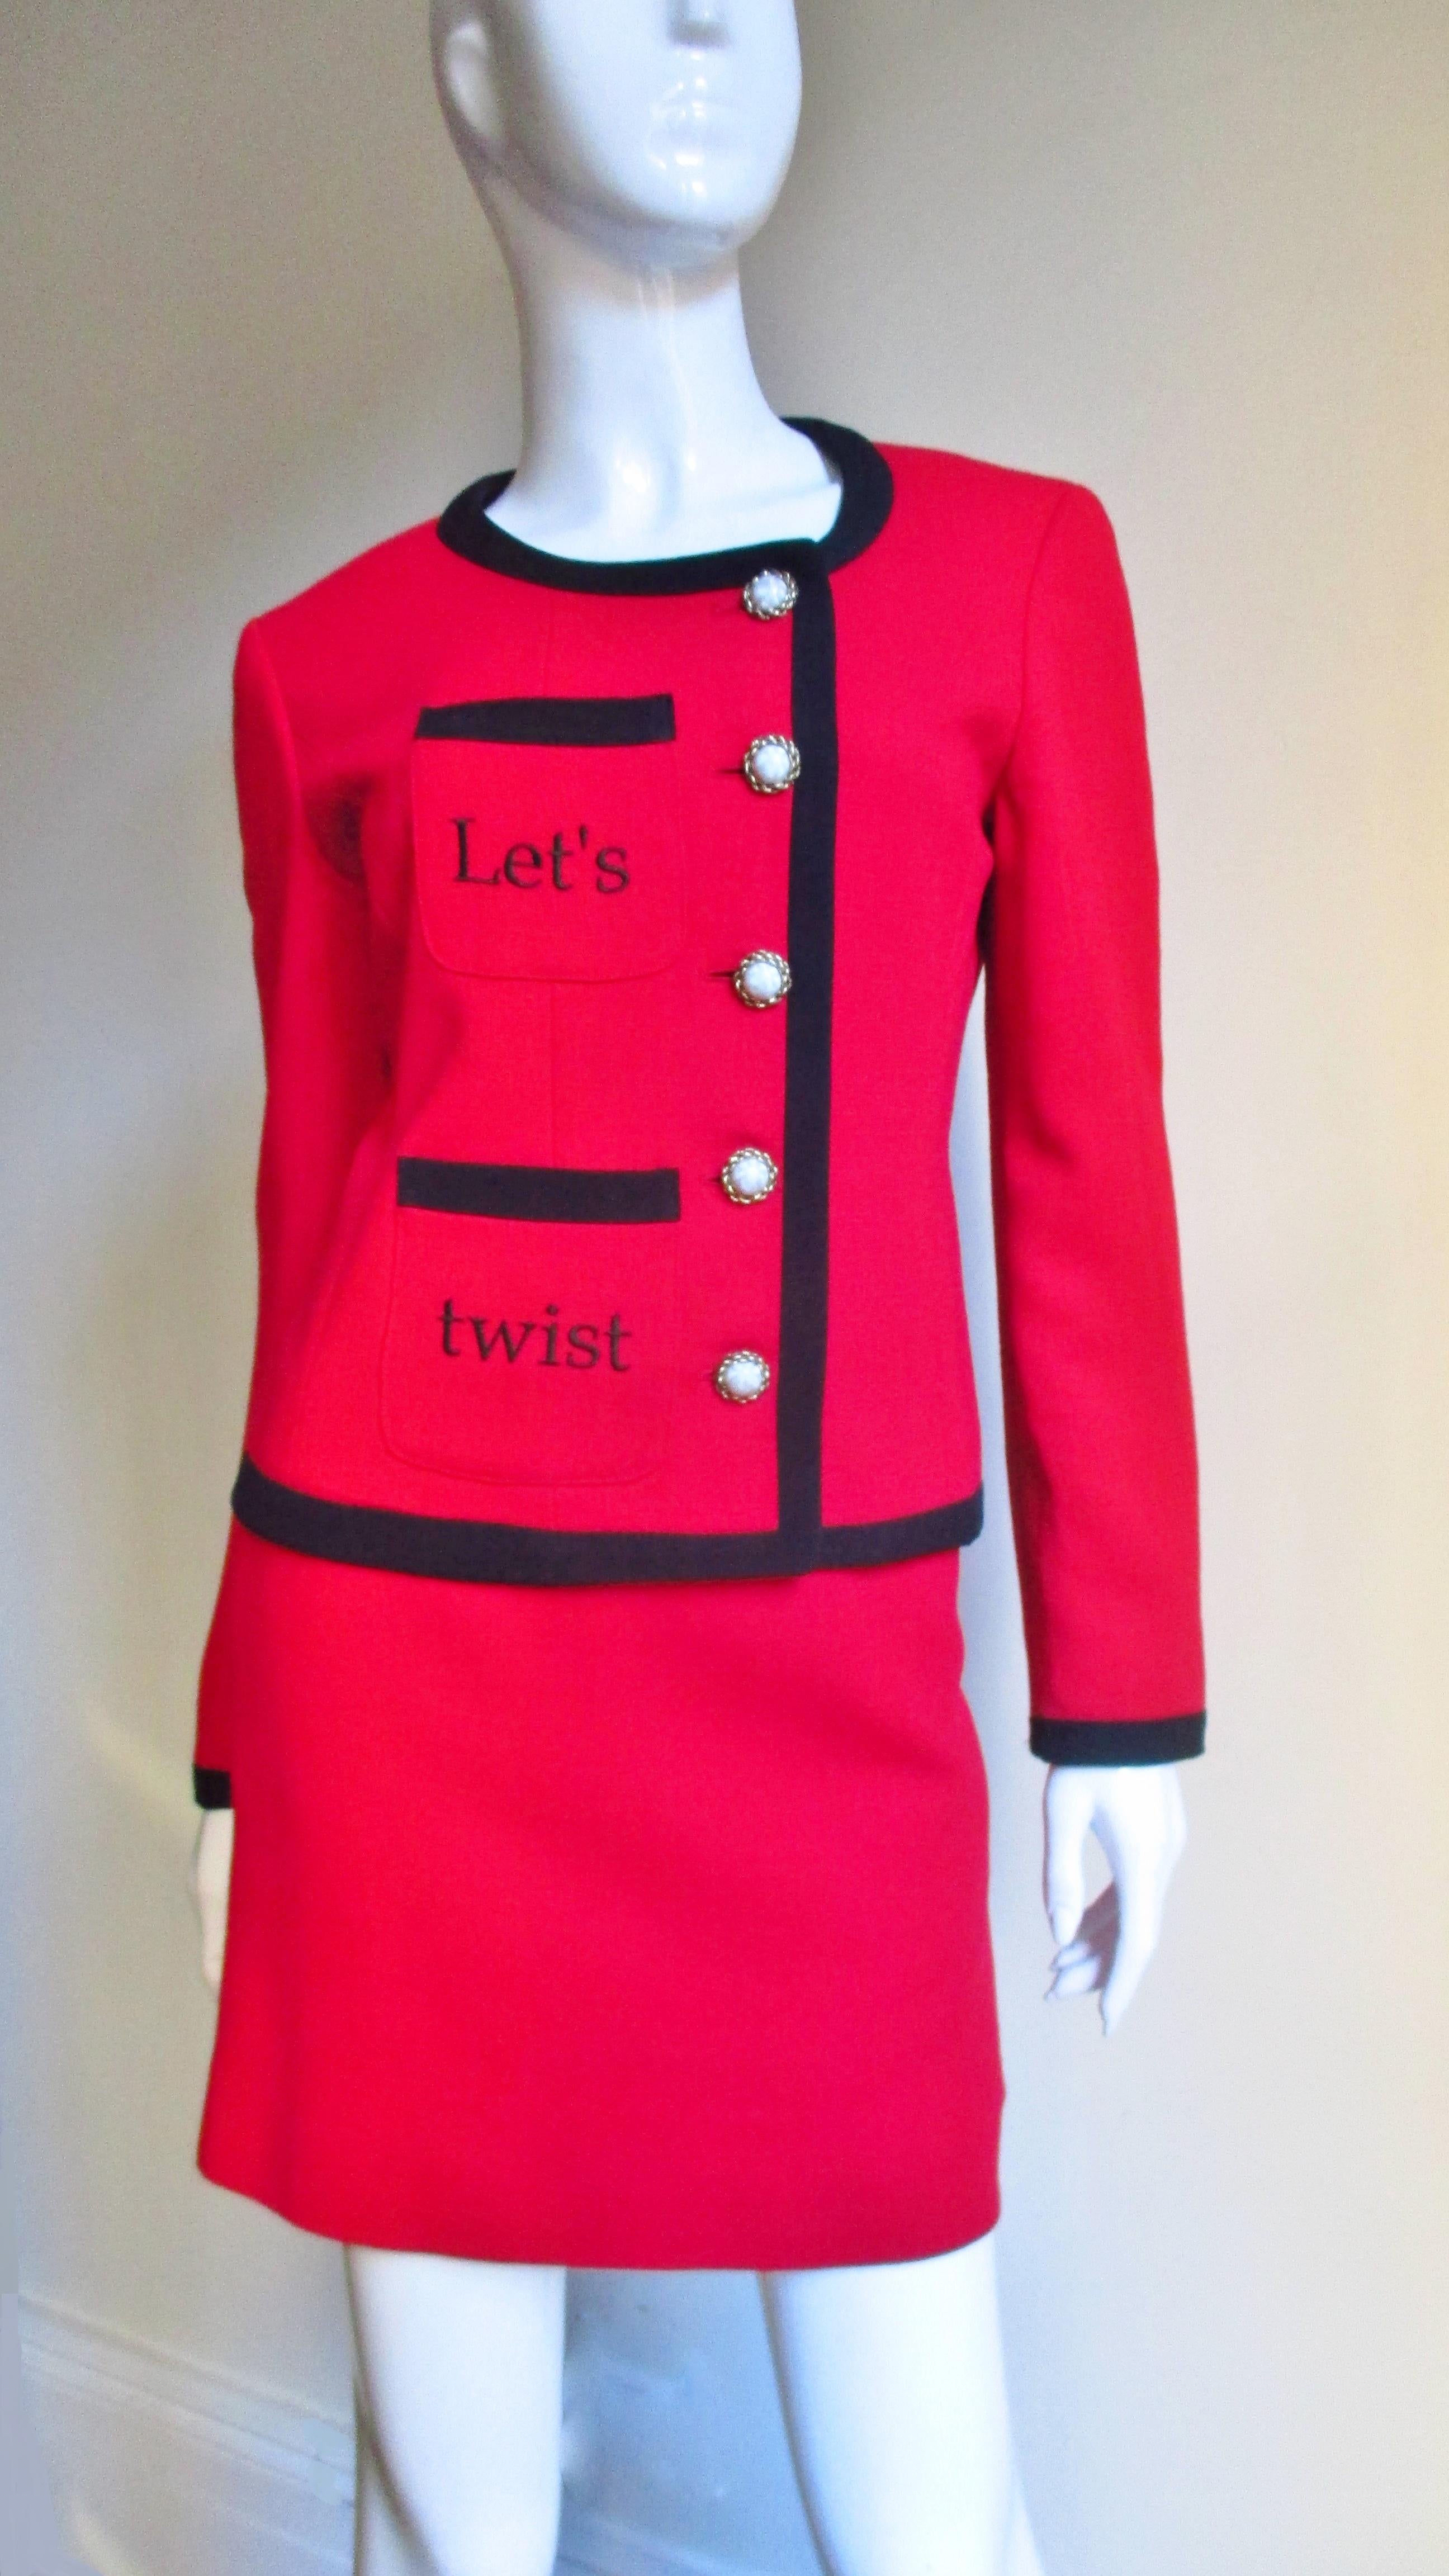 A fabulous red light weight wool skirt suit from Moschino. The hip length jacket closes off center with 5 pearl buttons and 2 pockets on one side above one another with the words 'Let's' and 'twist' embroidered in black.  The back has the same